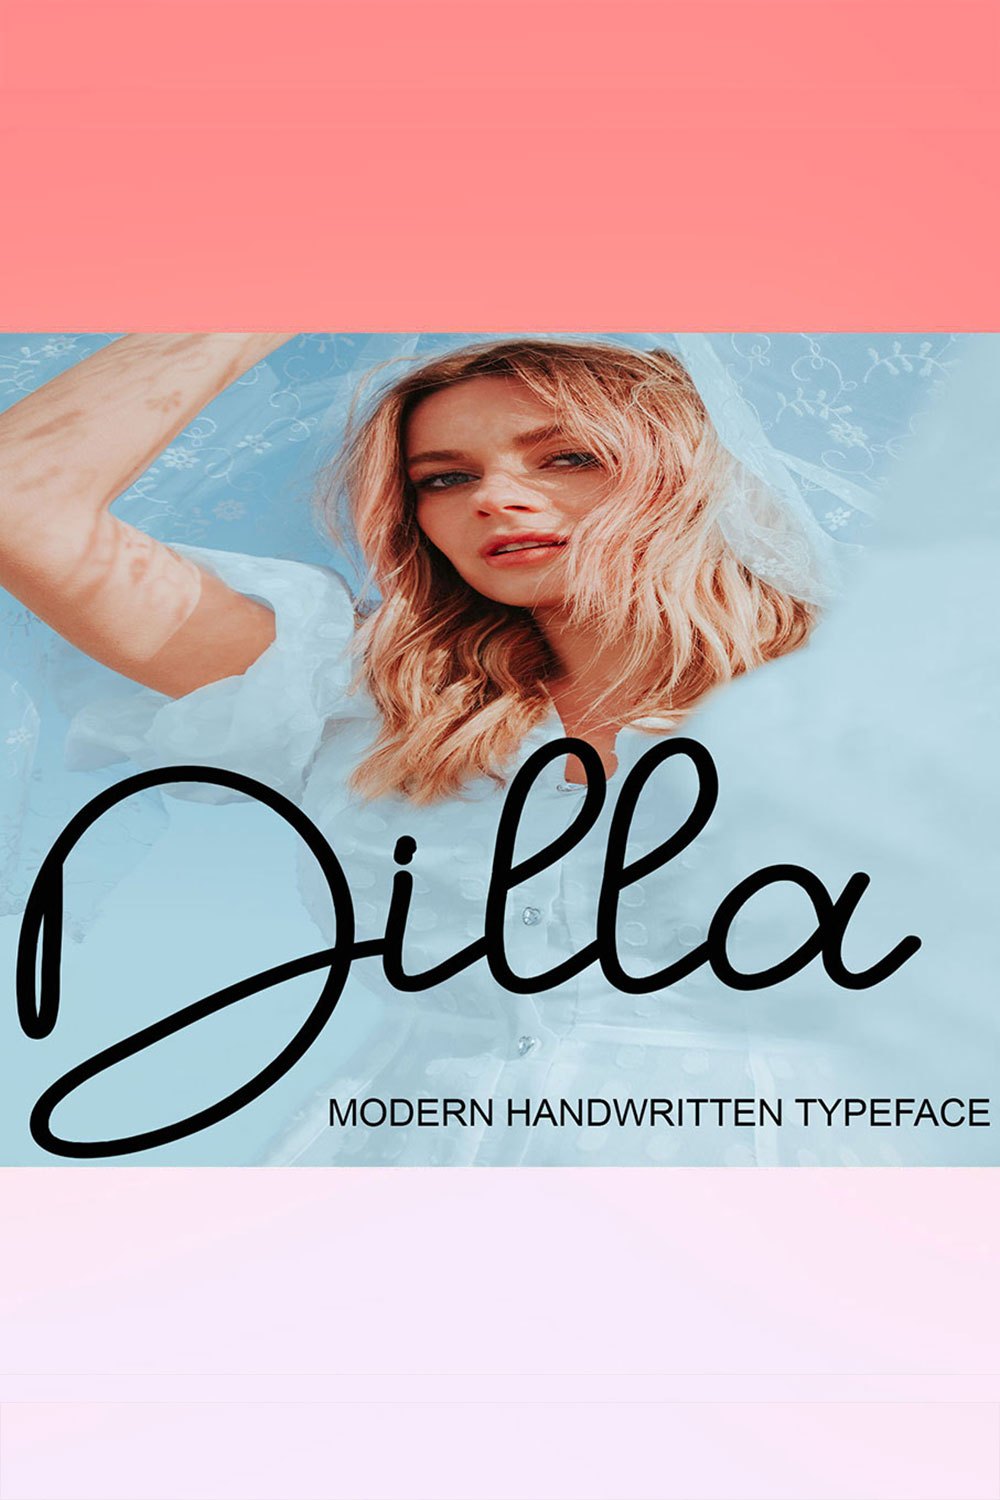 Dilla-only$5 pinterest preview image.